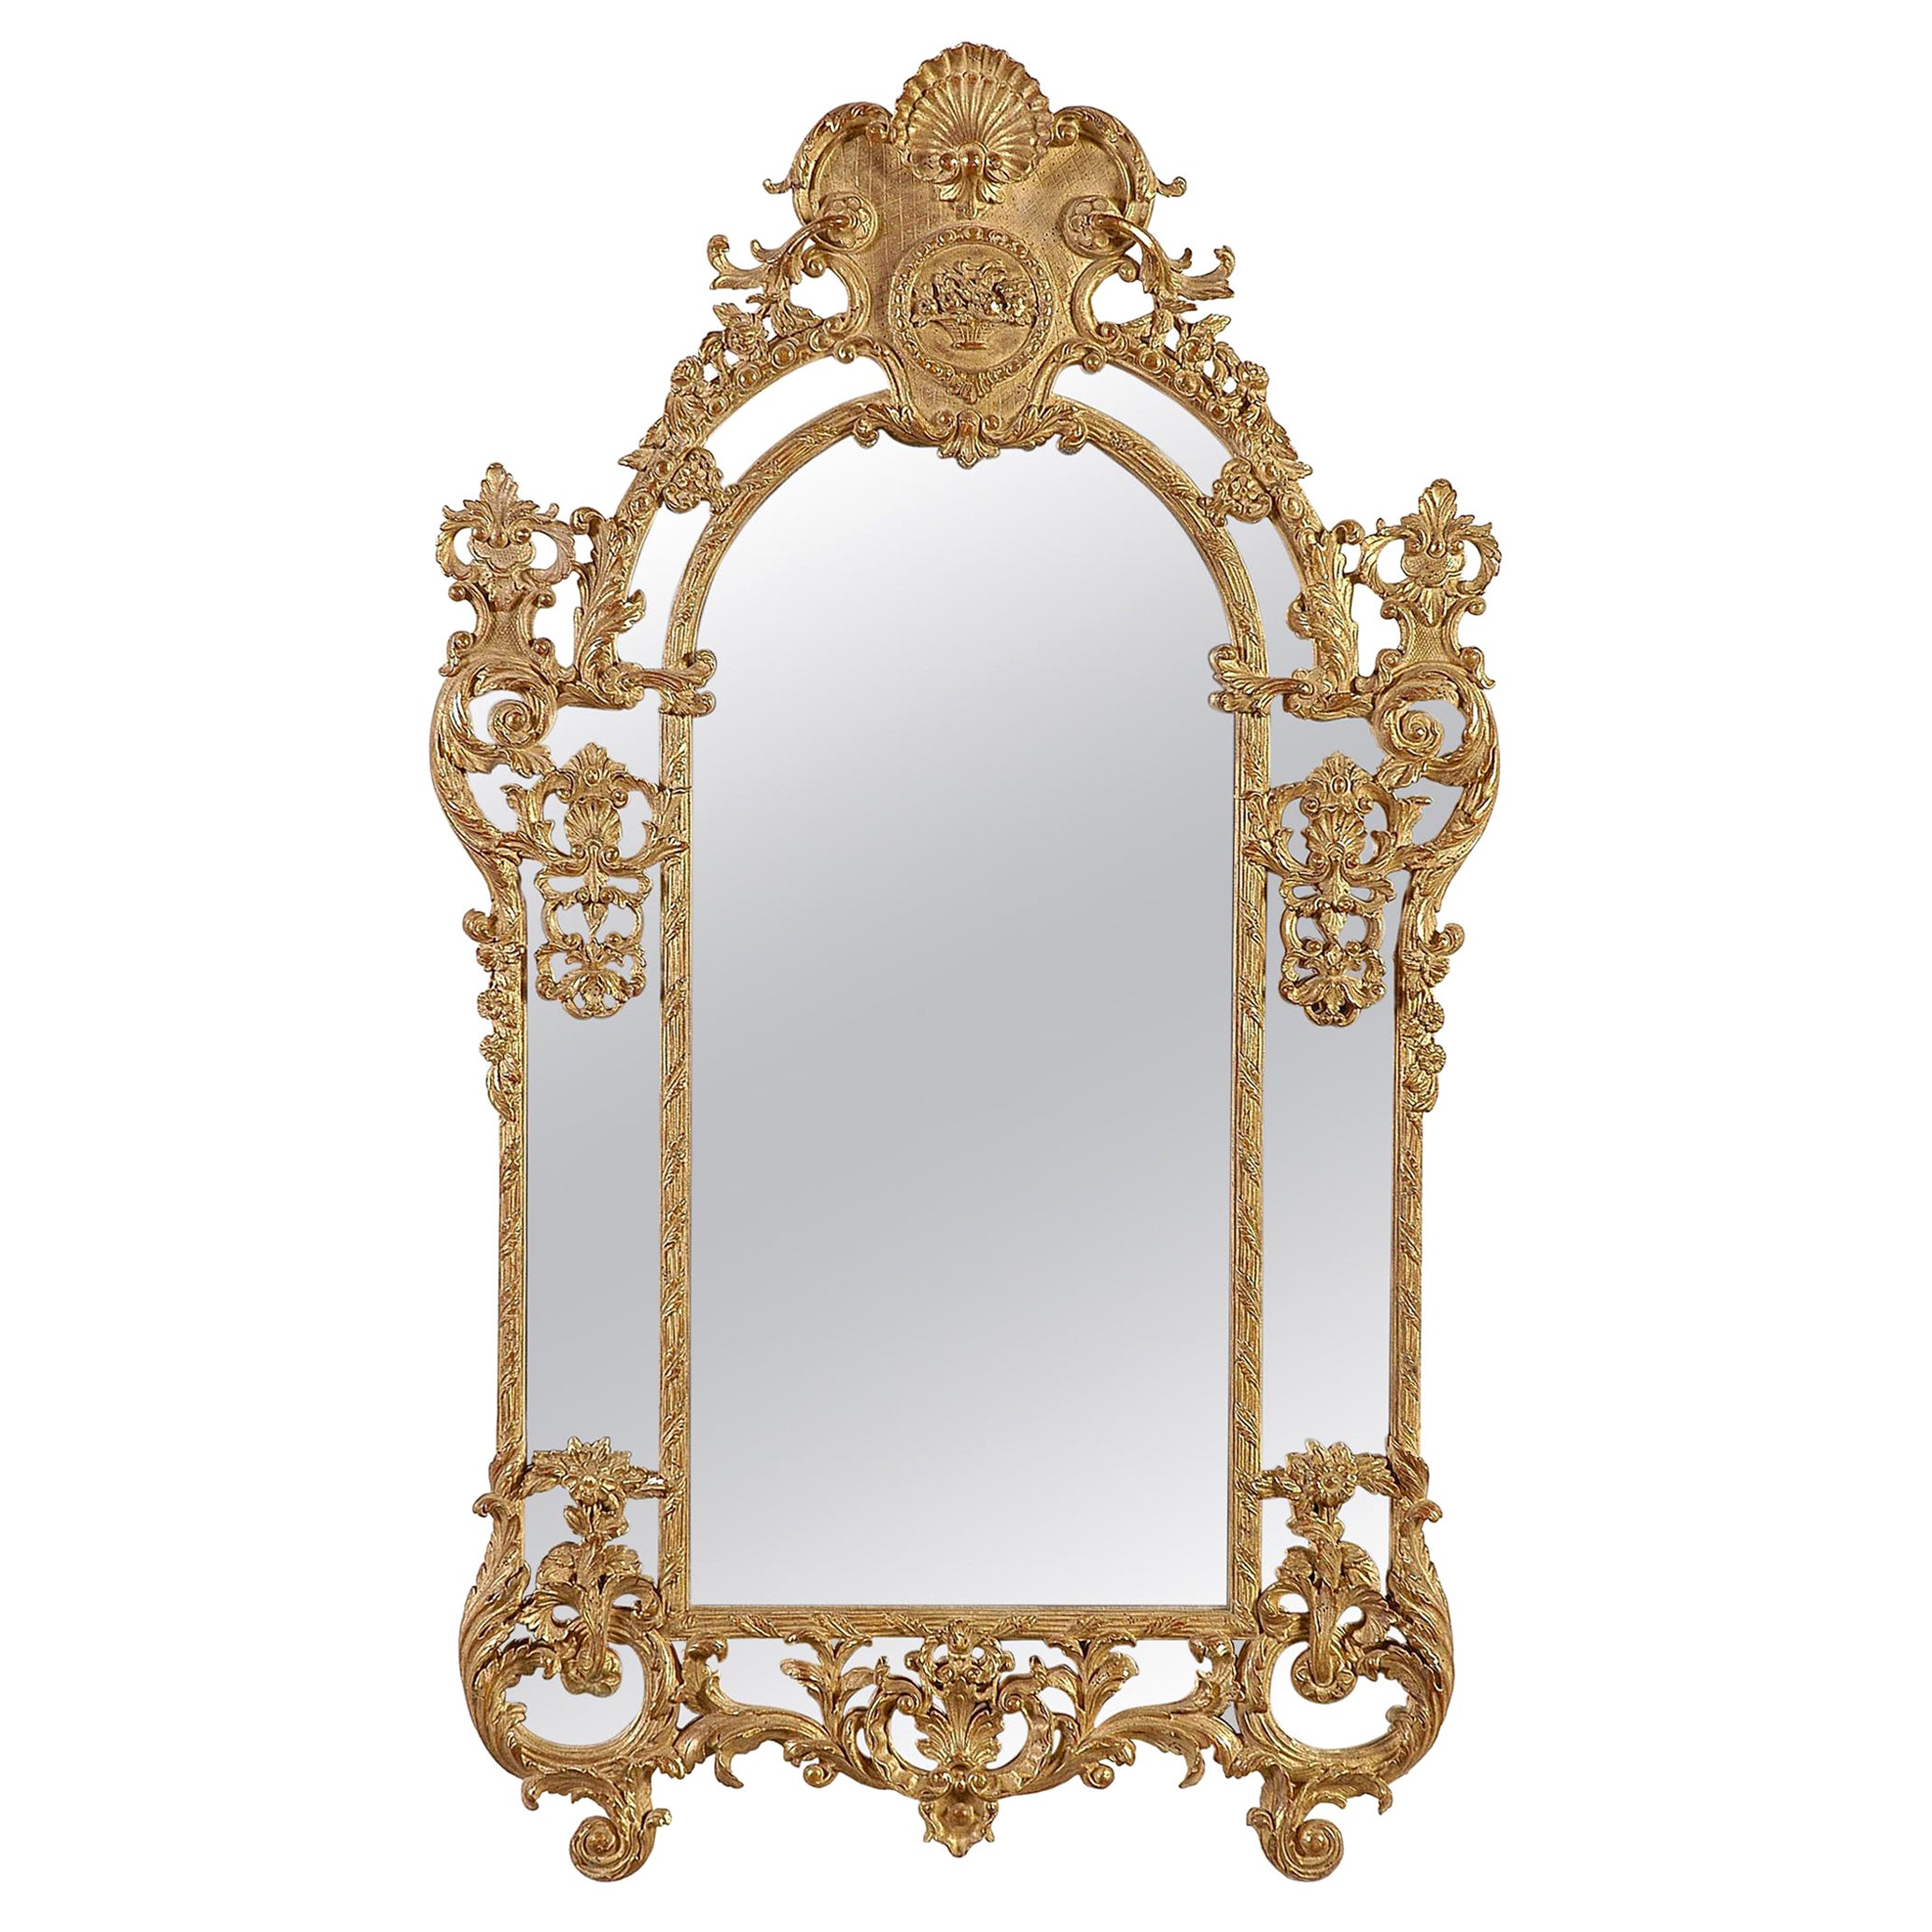 Neoclassical Regency Style Rectangular Gold Foil Hand Carved Wooden Mirror, 1970 For Sale